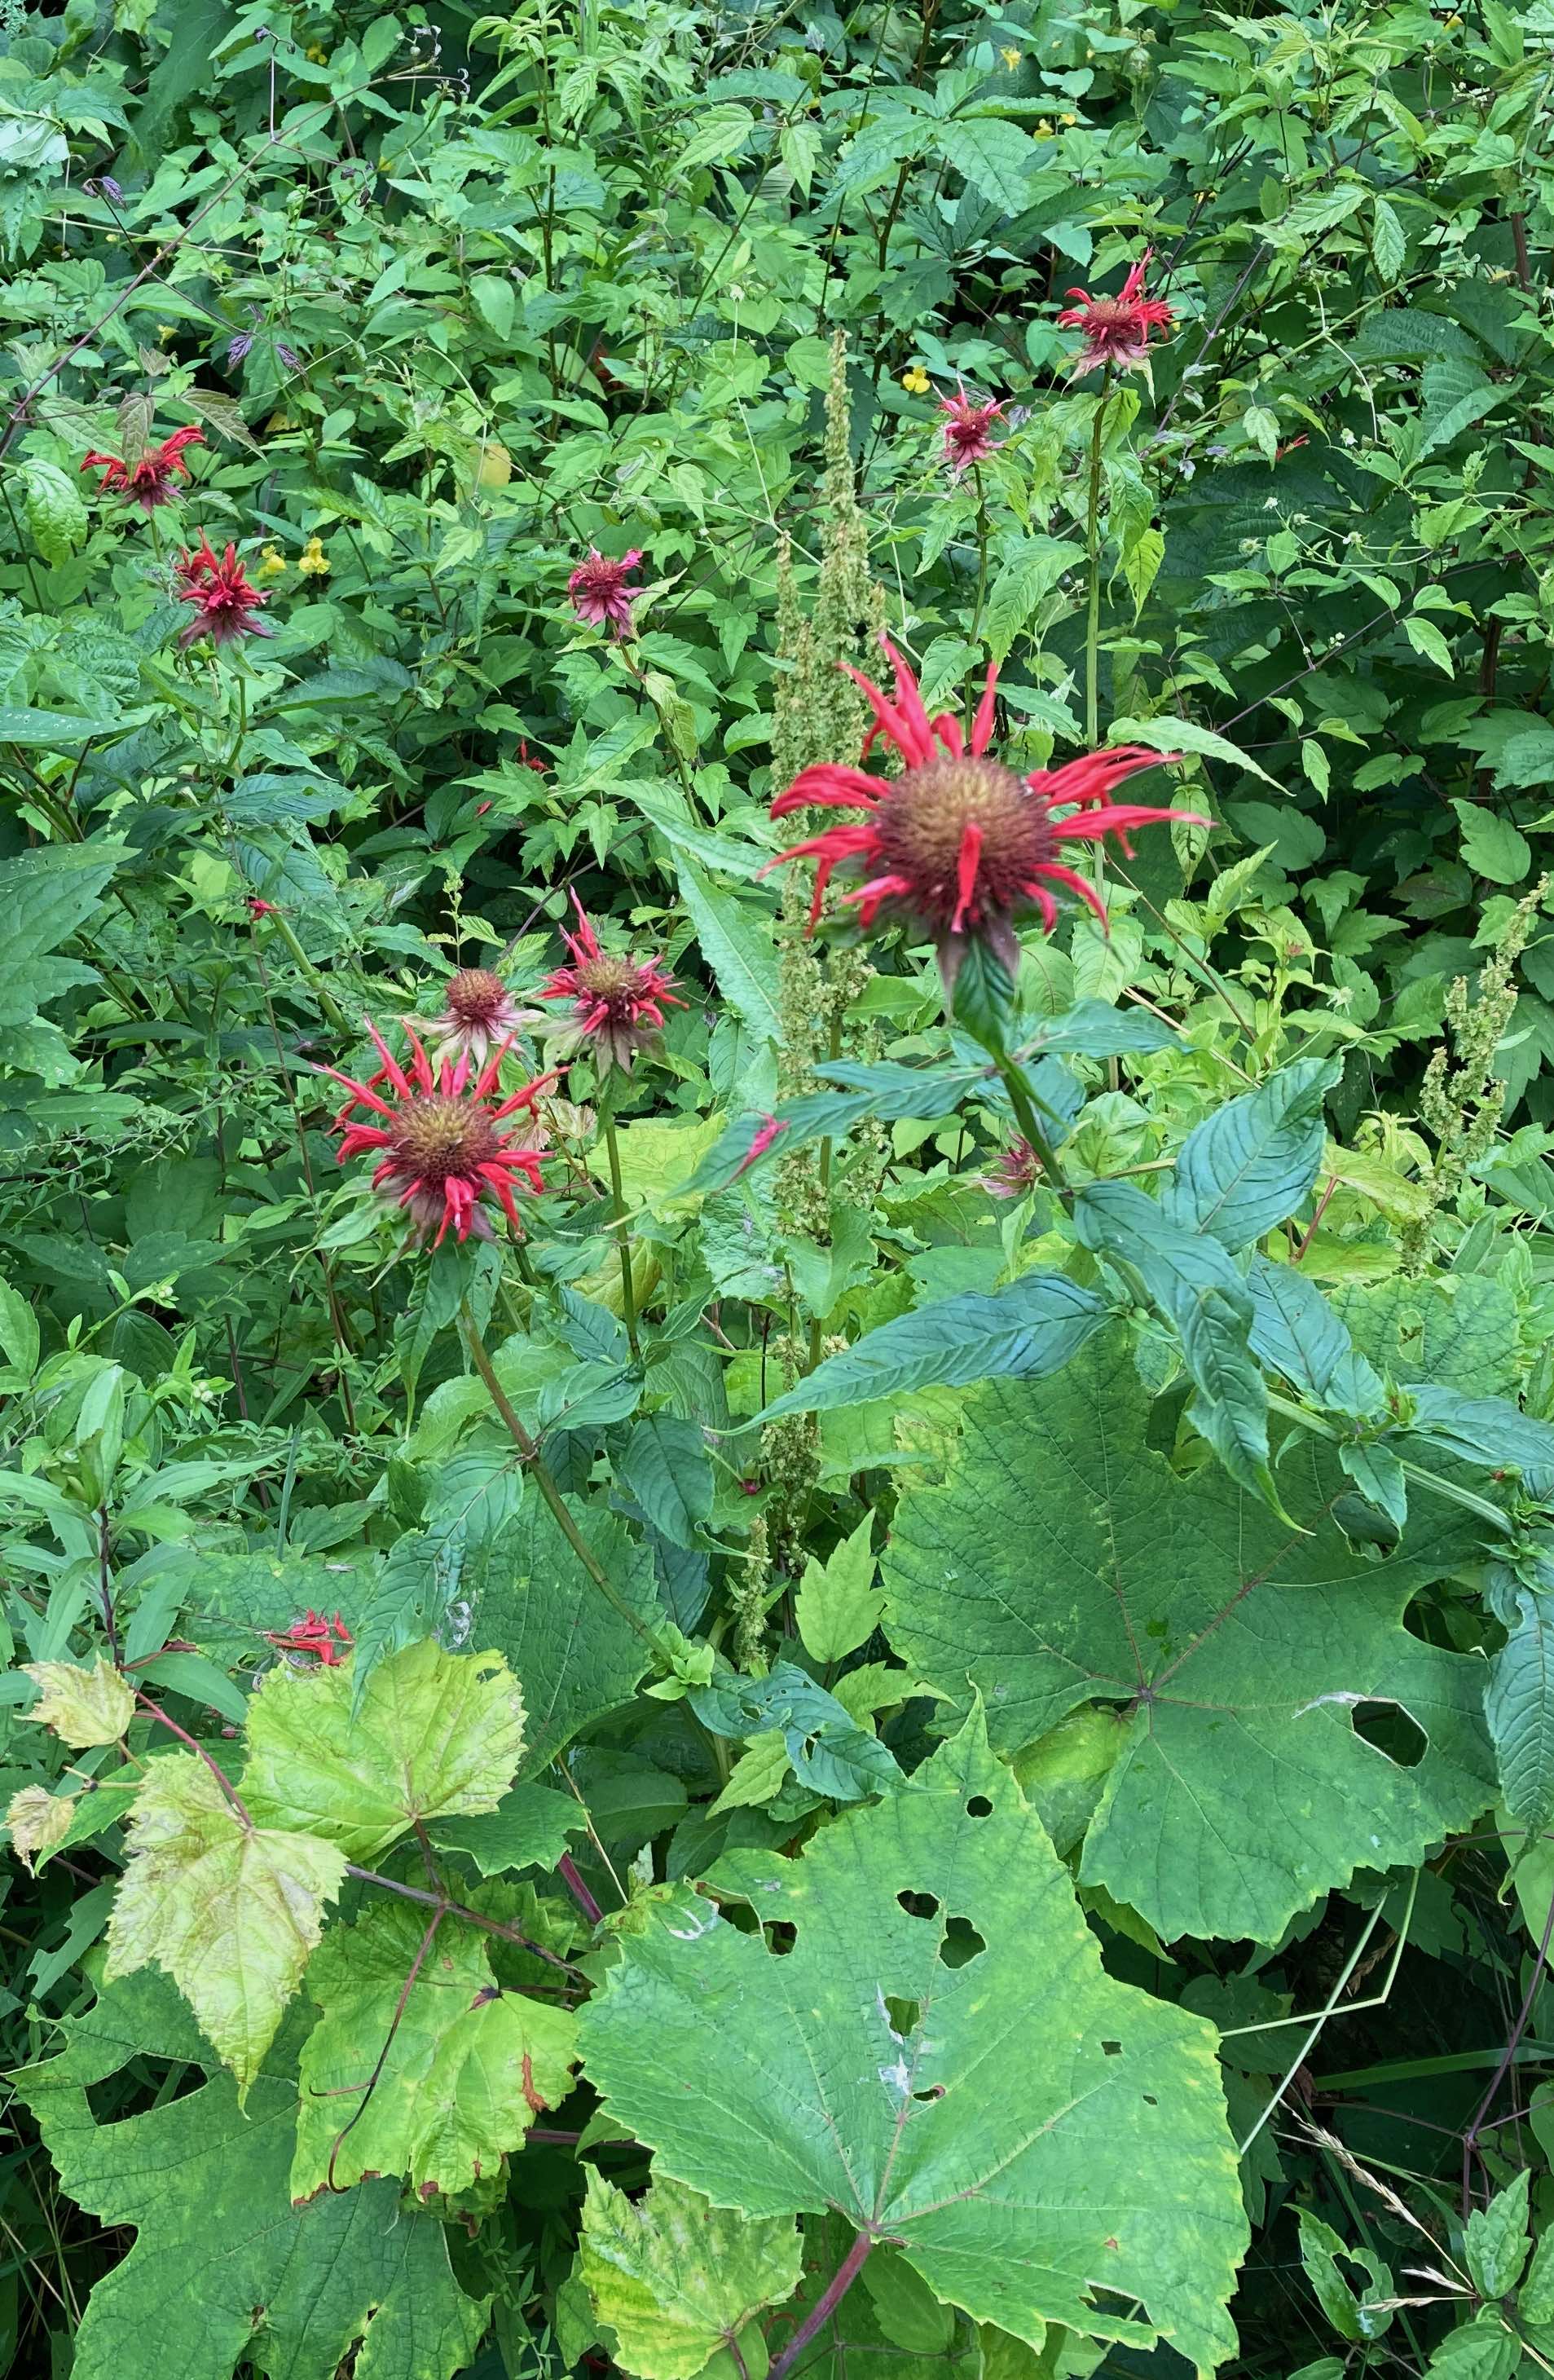 The Scientific Name is Monarda didyma. You will likely hear them called Bee-balm, Oswego Tea, Scarlet Beebalm, Red Bergamot. This picture shows the  of Monarda didyma